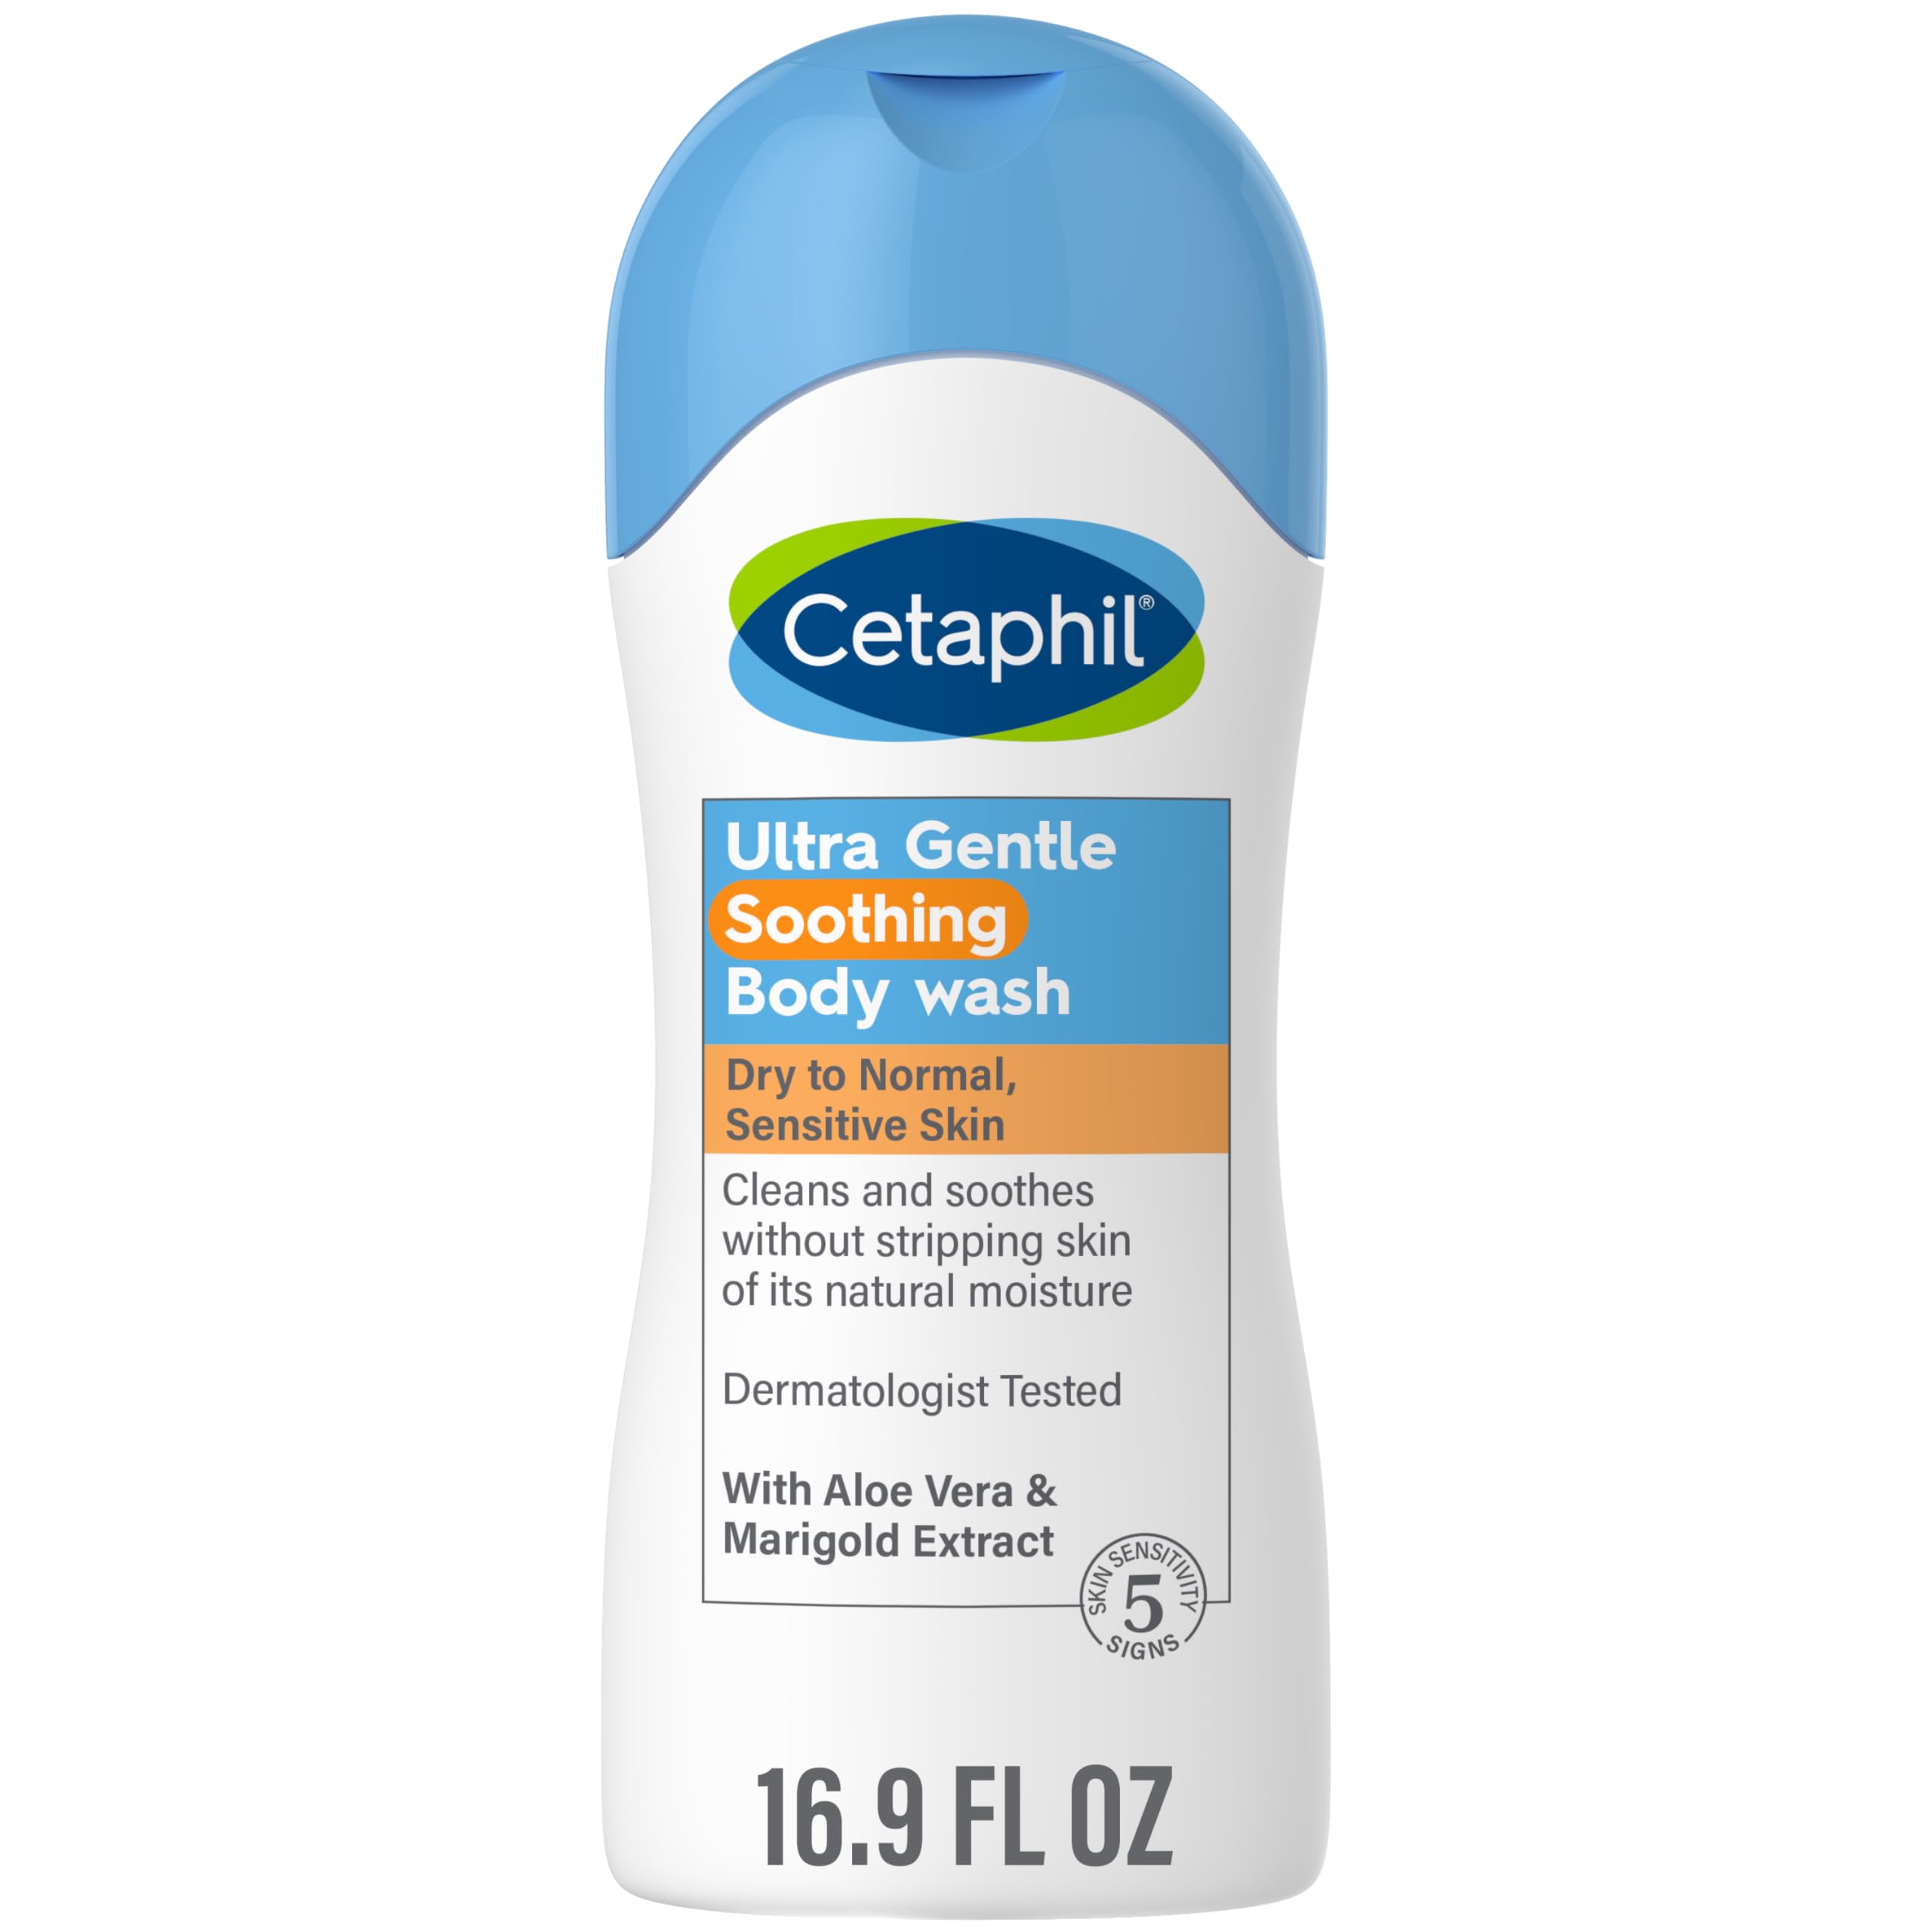 Cetaphil Body Wash, NEW Moisturizing Relief Body Wash for Sensitive Skin, Creamy Rich Formula & Ultra Gentle Refreshing Body Wash, For Dry to Normal, Sensitive Skin, 16.9oz, with Aloe Vera